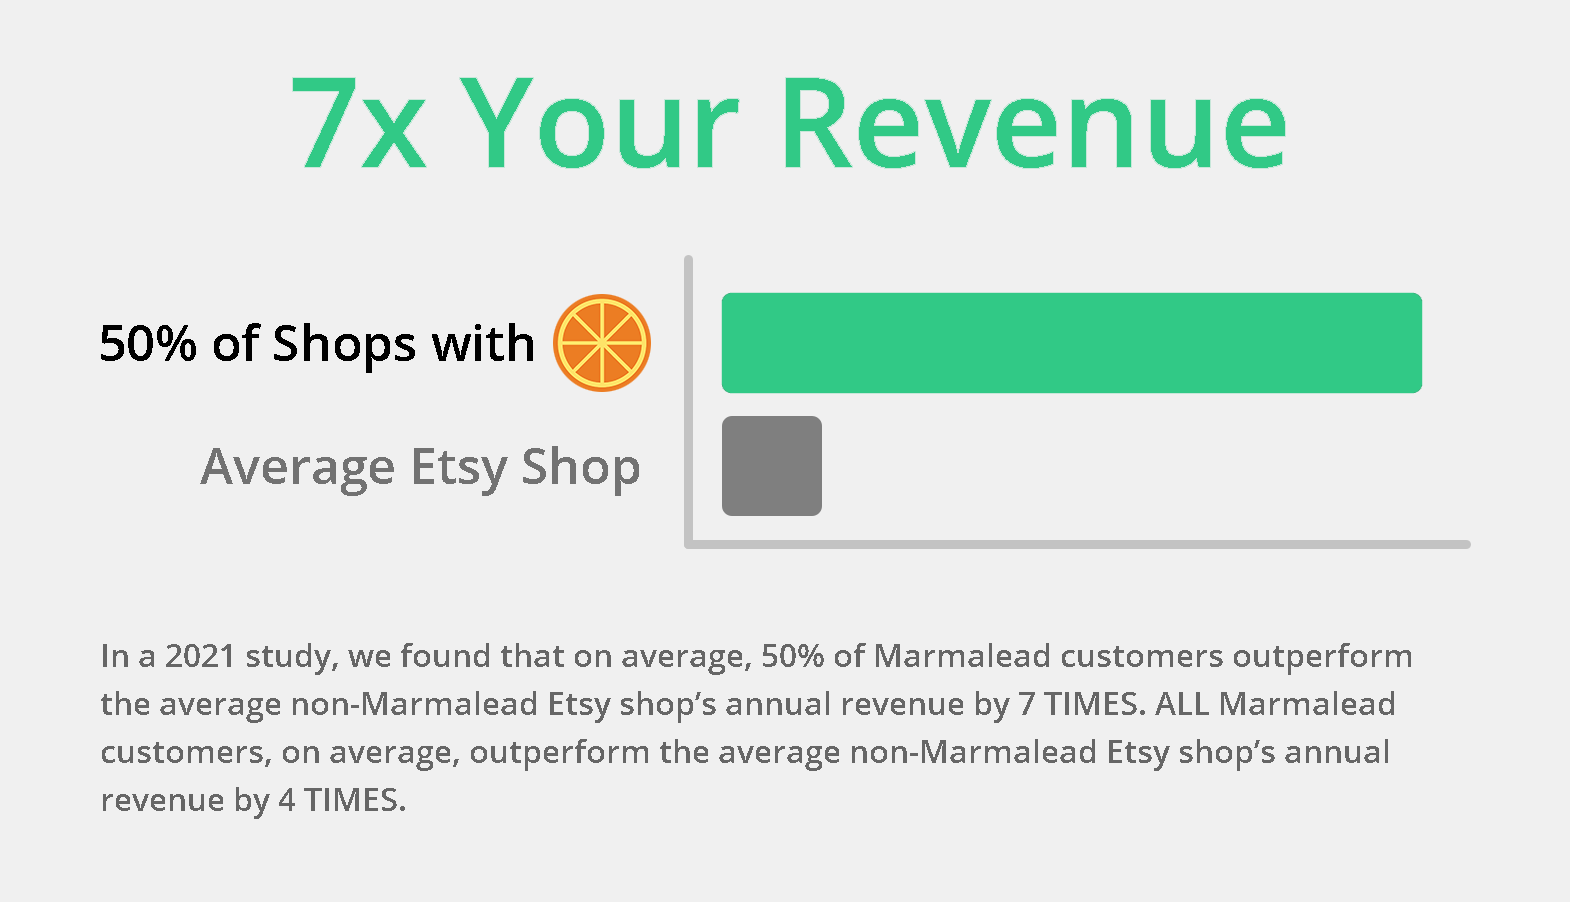 In a 2021 study, we found that 50% of Marmalead customers outperform the average Etsy shop's annual revenue by 7 TIMES. ALL Marmalead customers outpeform the average non-Marmalead shop's annual revenue by 4 TIMES on average.